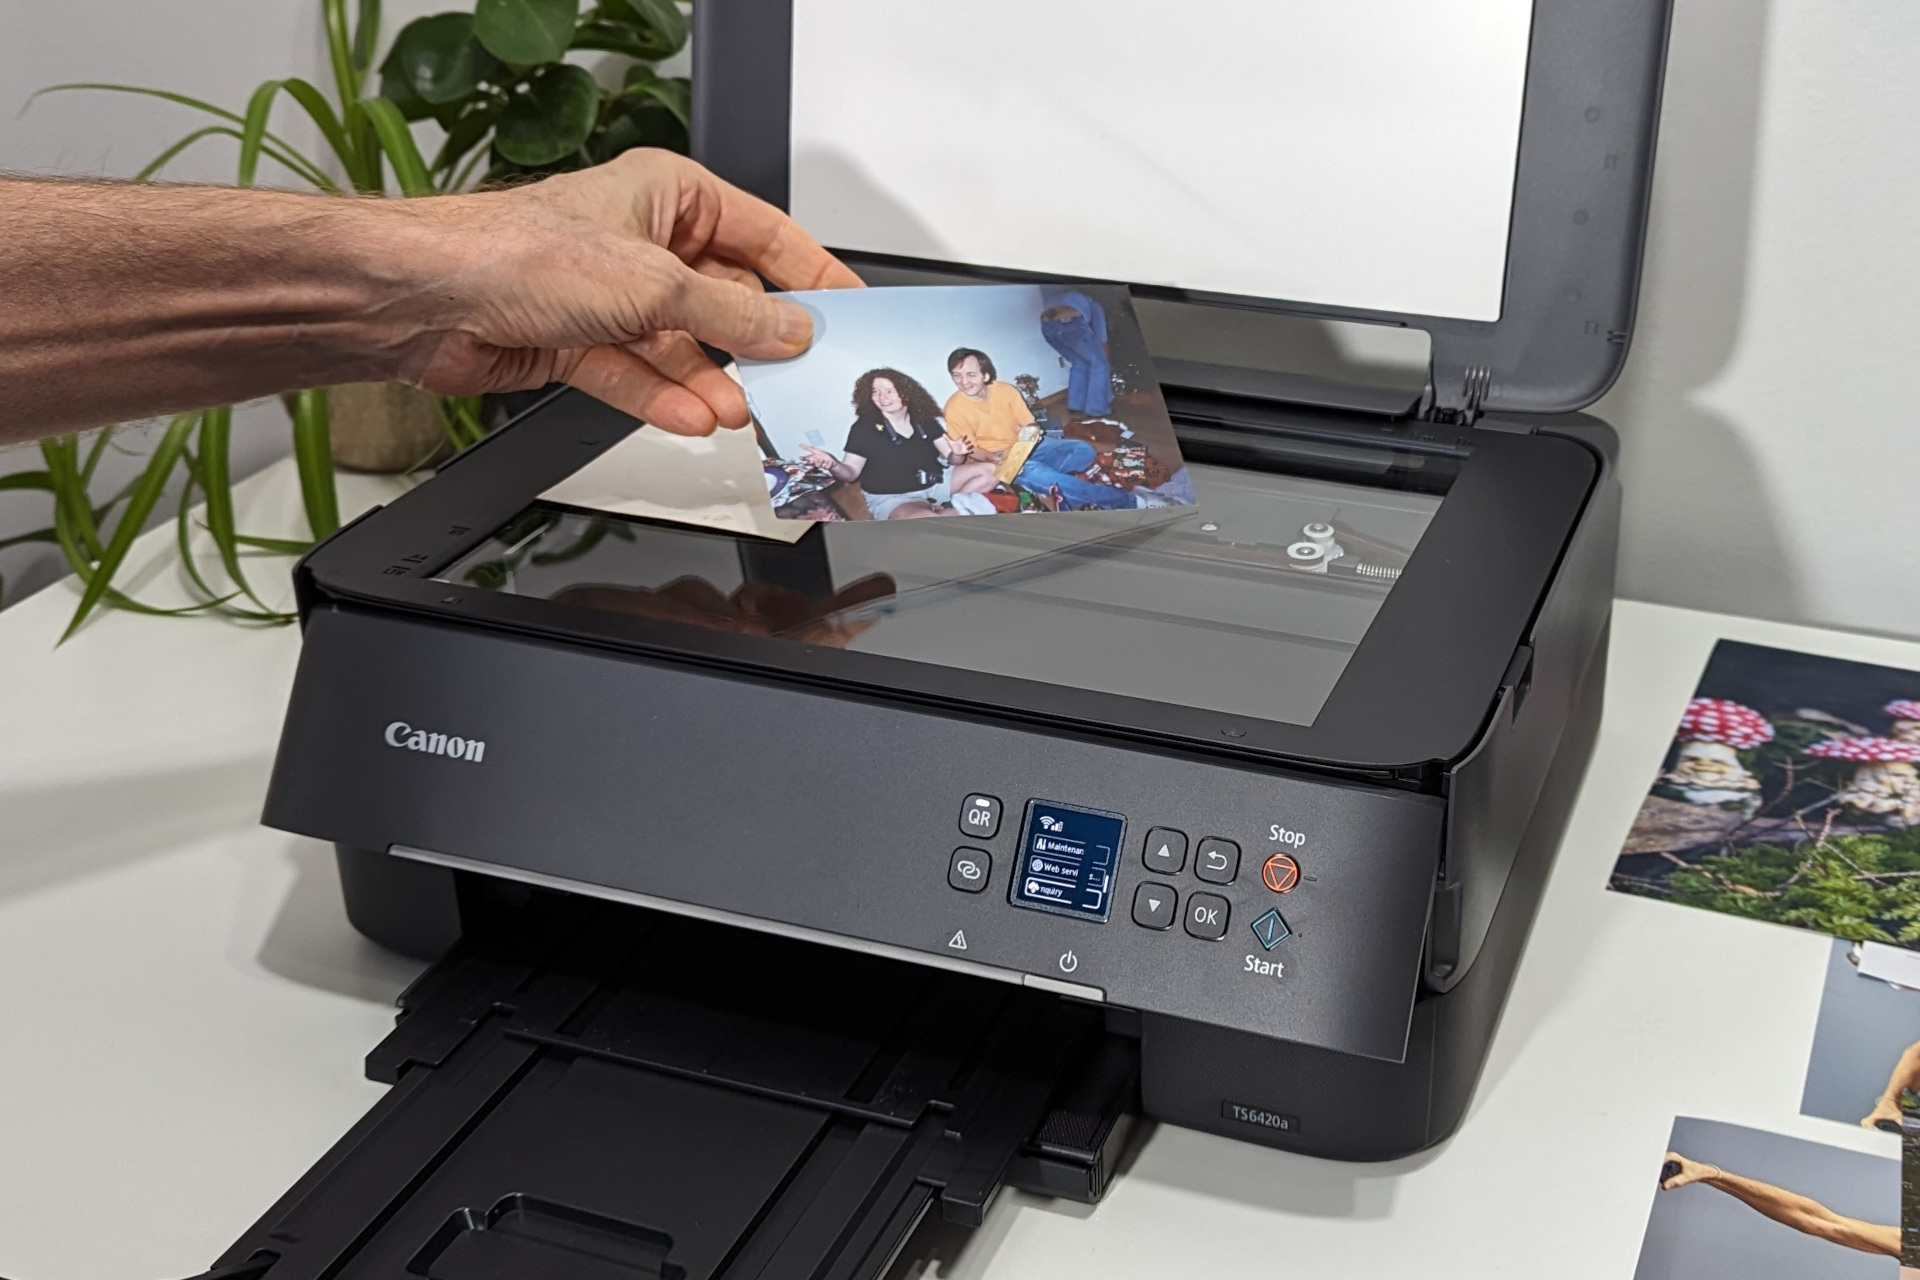 Canon Pixma TS6420a review: a budget all-in-one printer